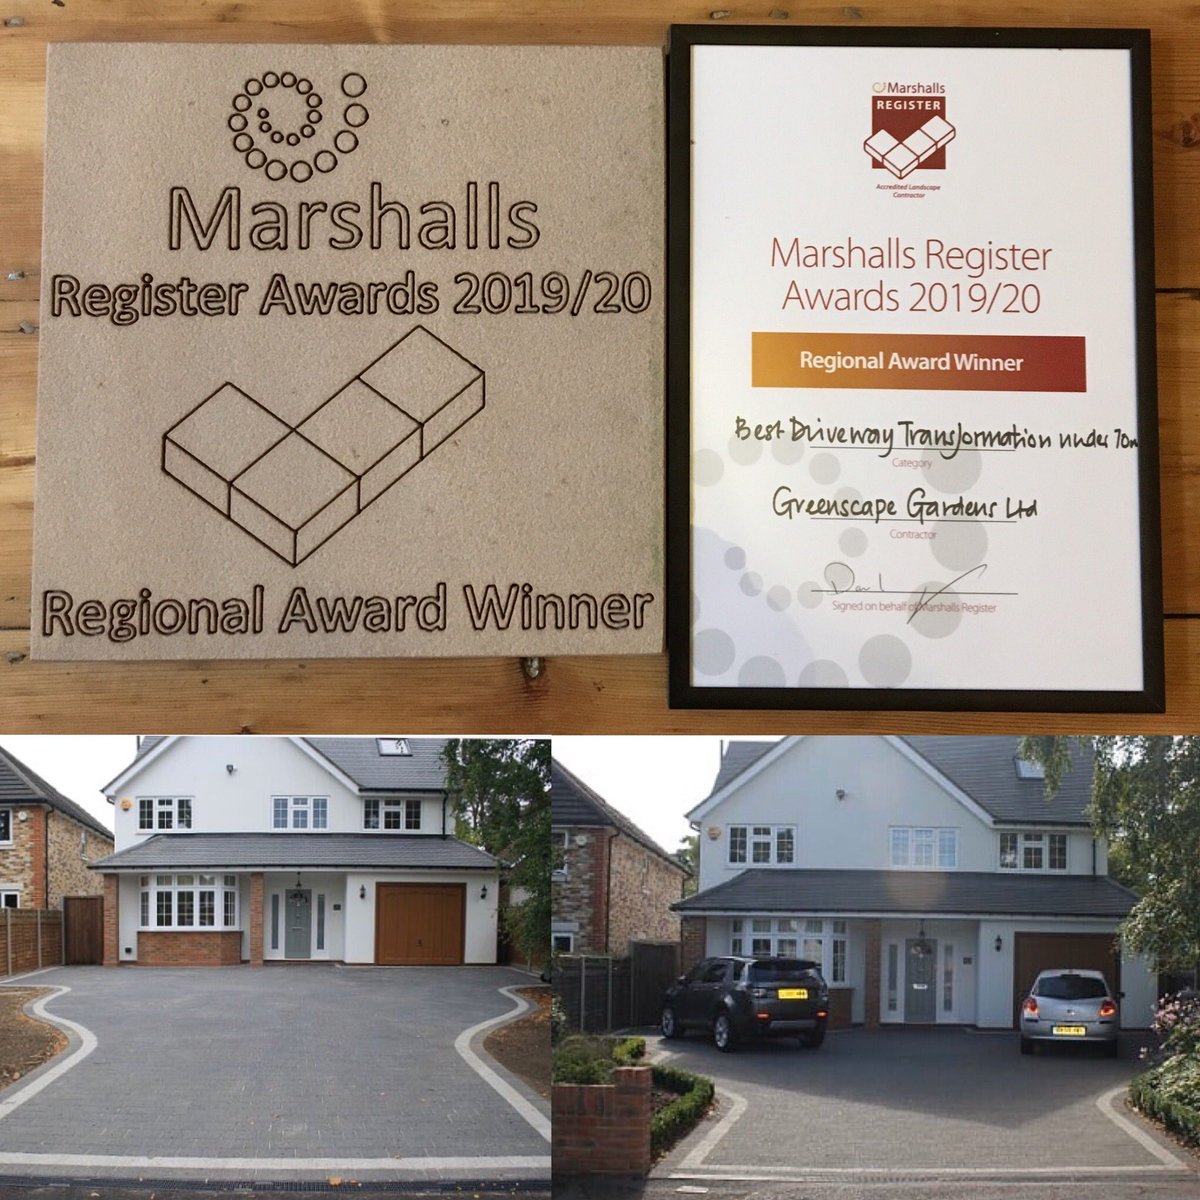 Thank you @MarshallsGroup for a brilliant roadshow, some great new products and a wonderful evening!
Proud to pick up another award 🏆
Roll on the Nationals!!!! 🥳🥳
@MarshallsReg @Waynoro @richard_ballan @psjdoidge